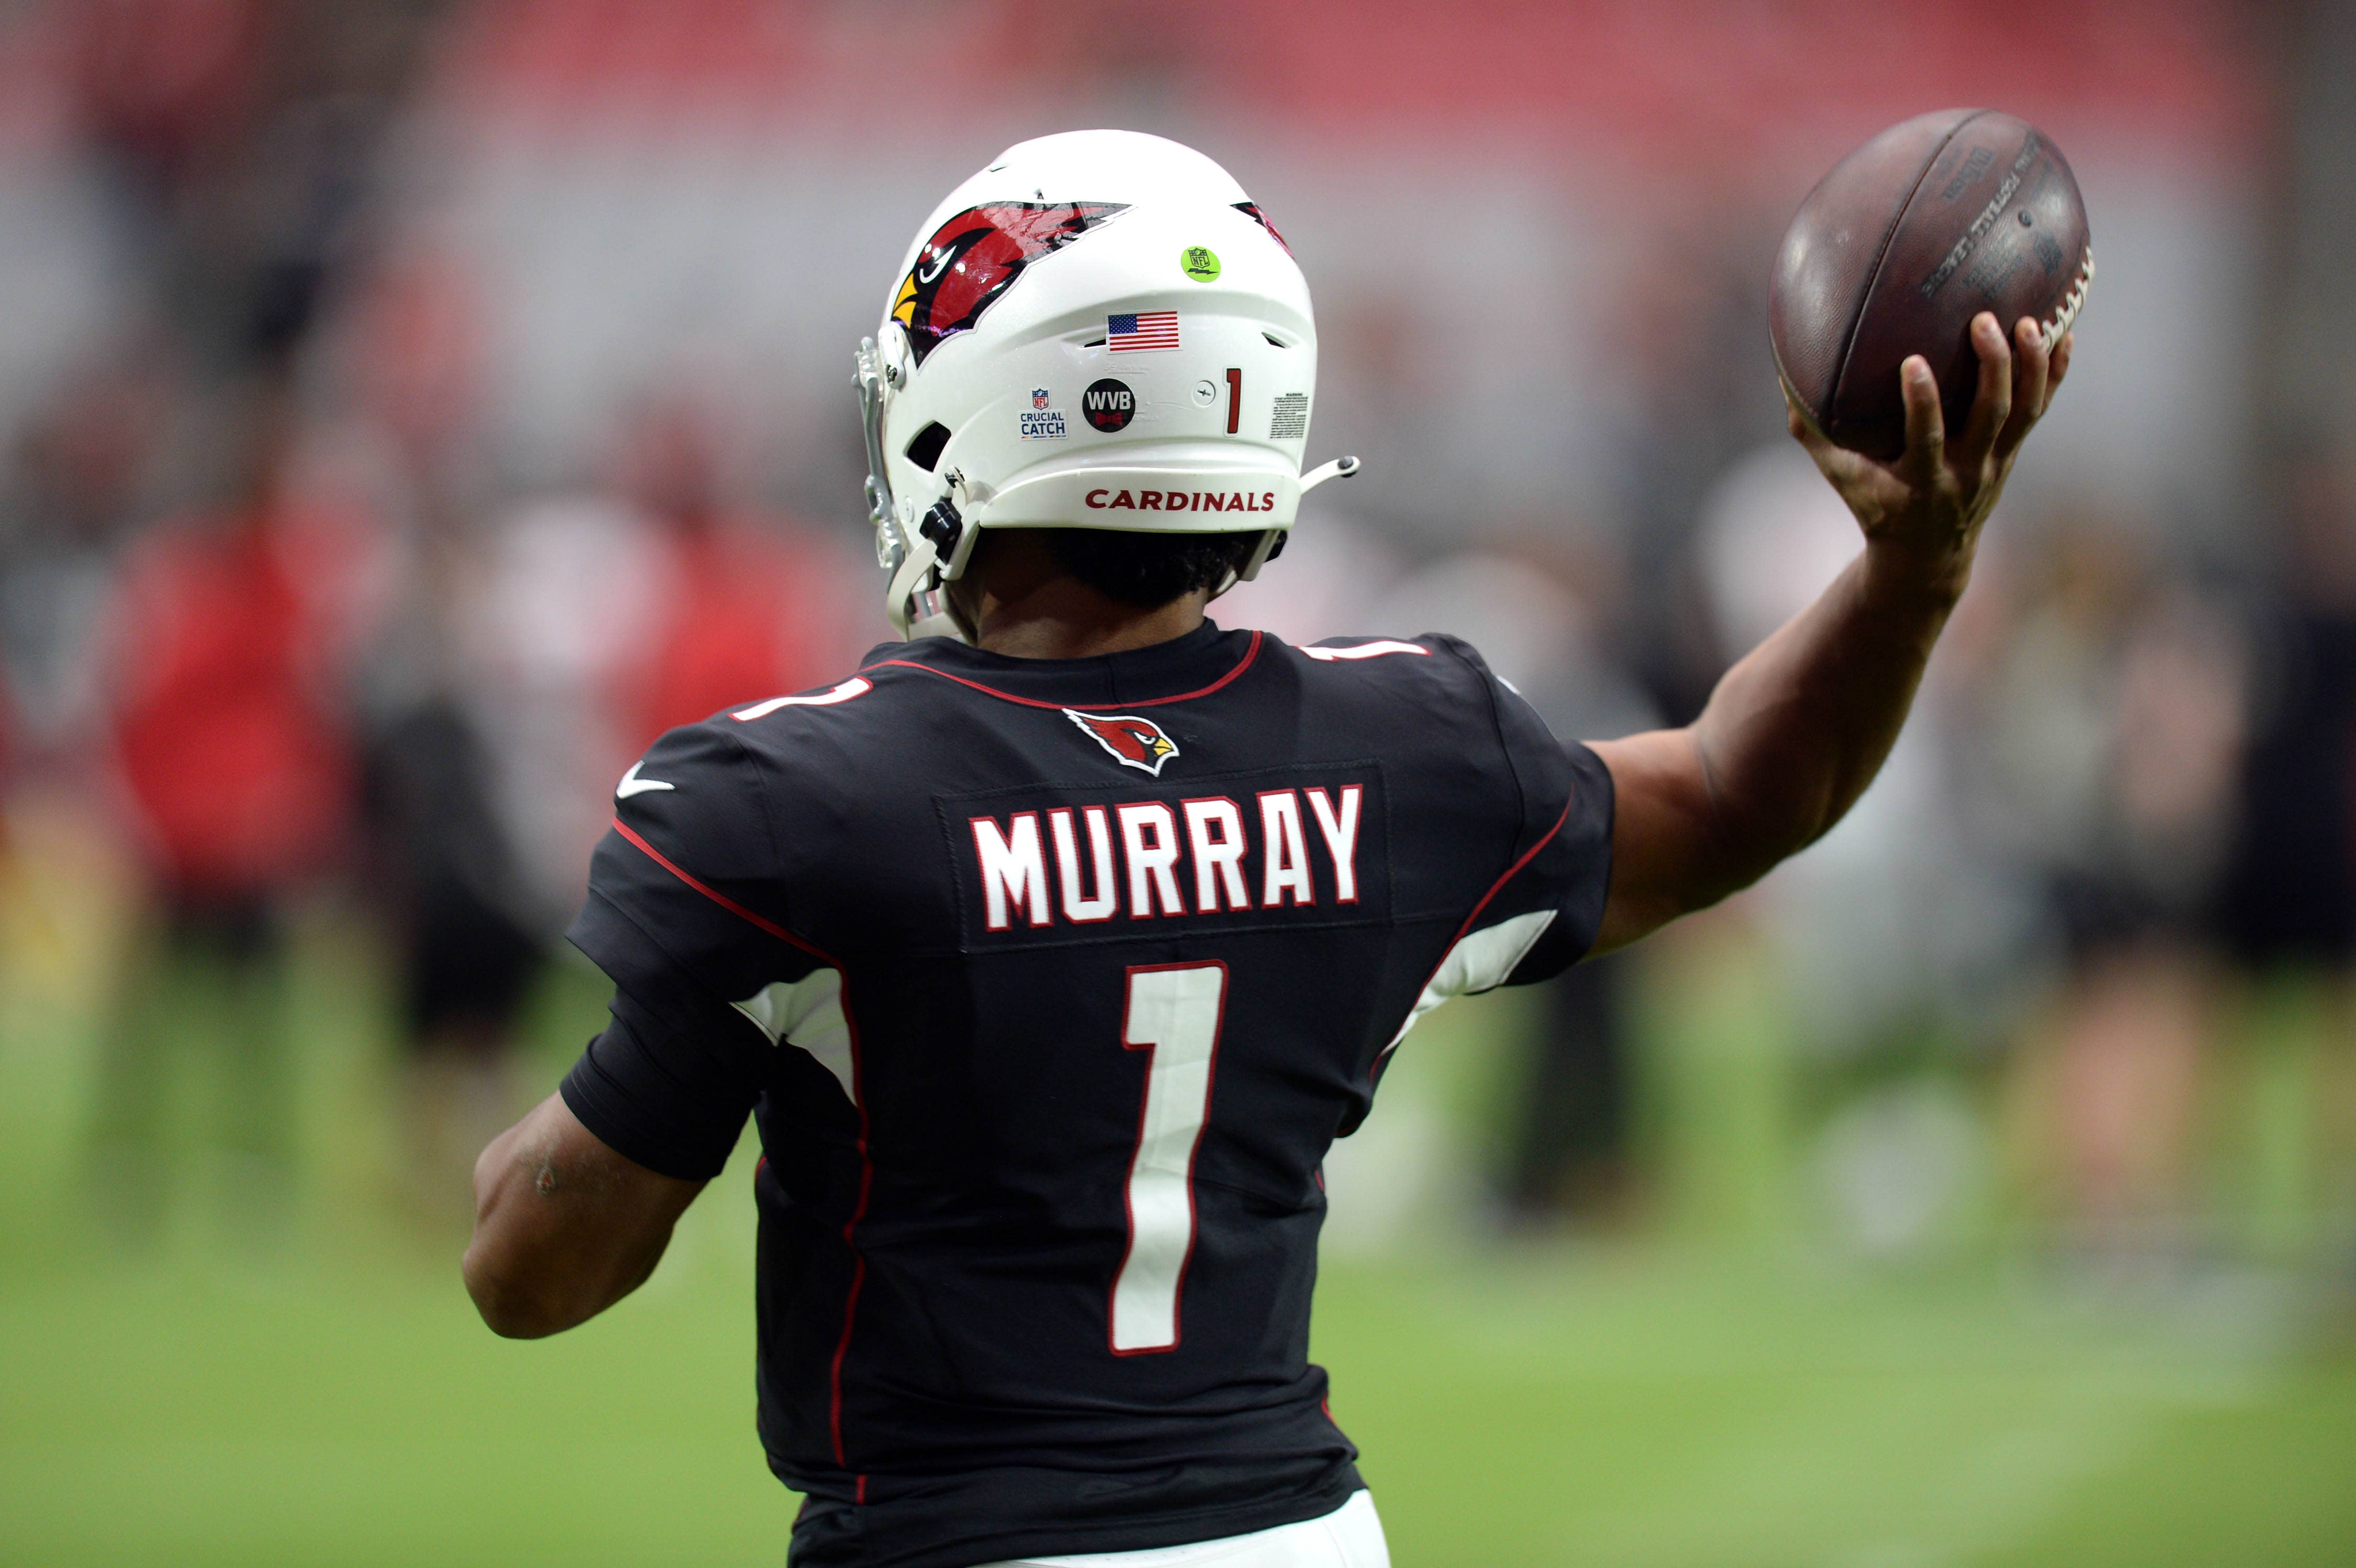 Cardinals' Kyler Murray focused on playing well amid rookie hype